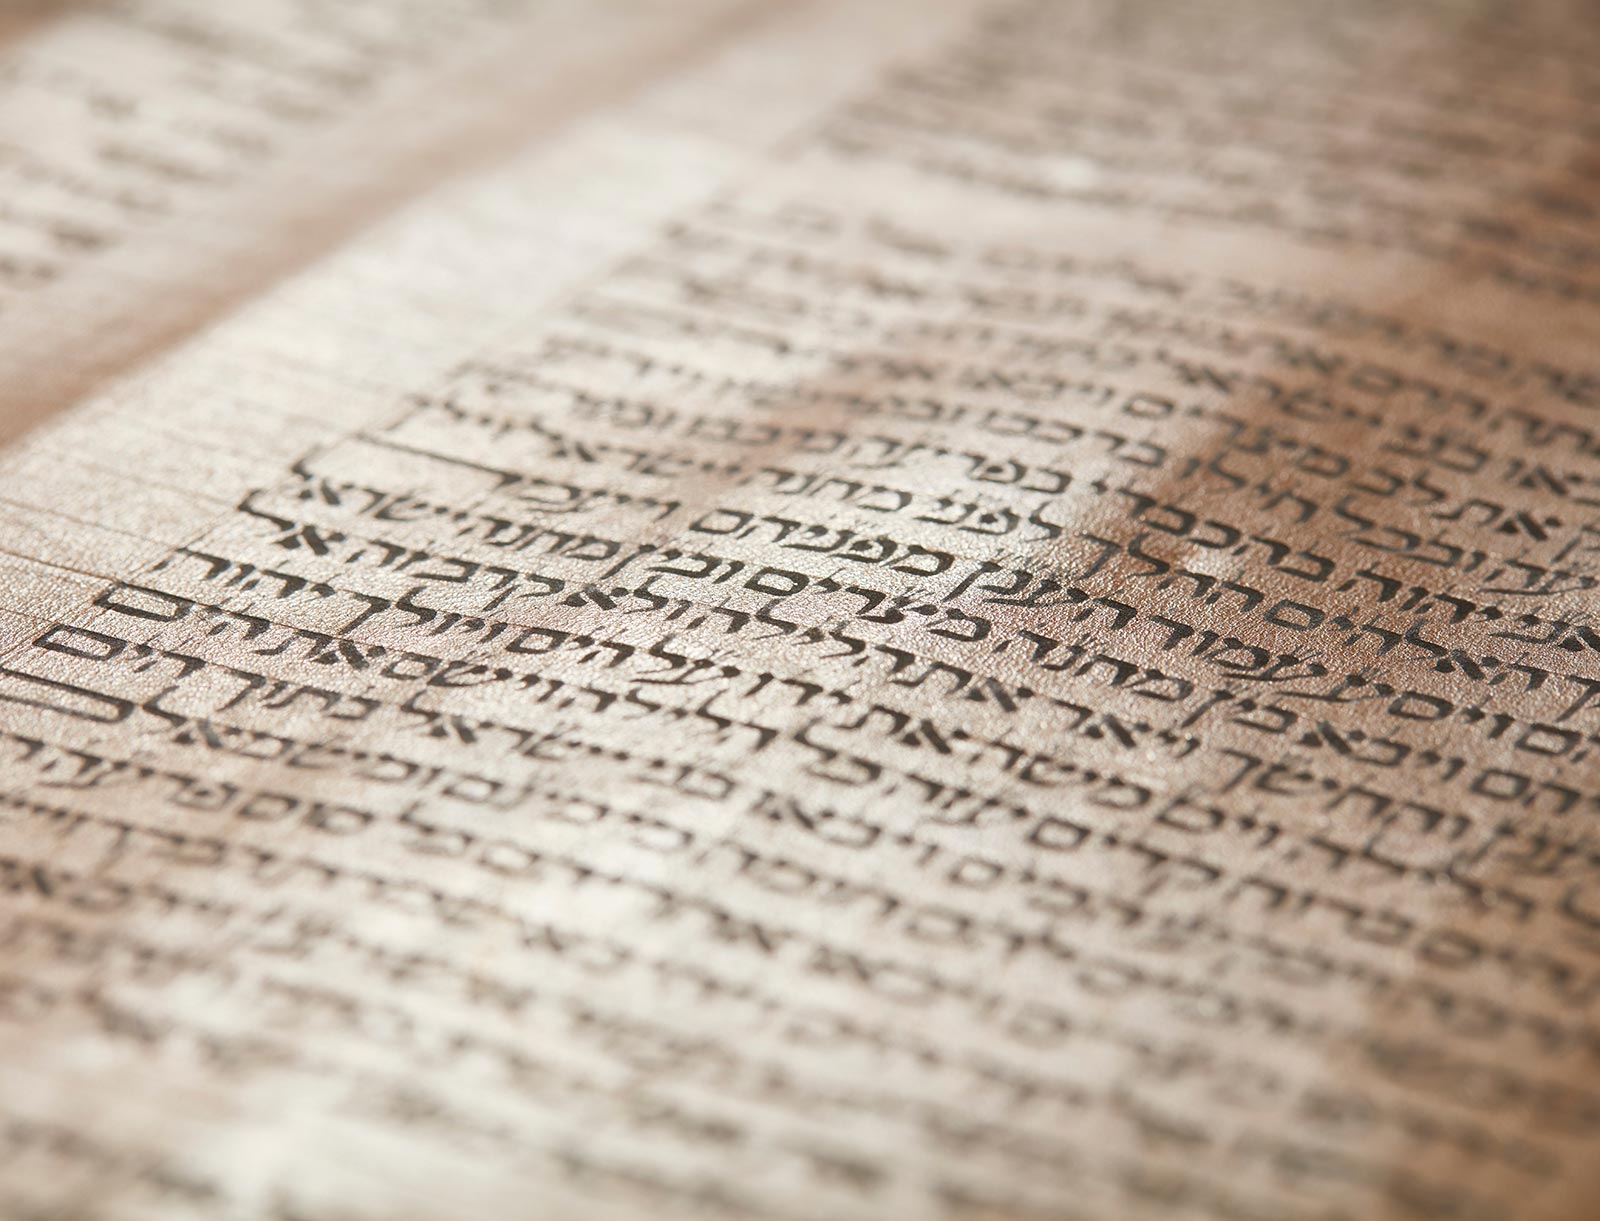 Two Future Trends in Biblical Scholarship